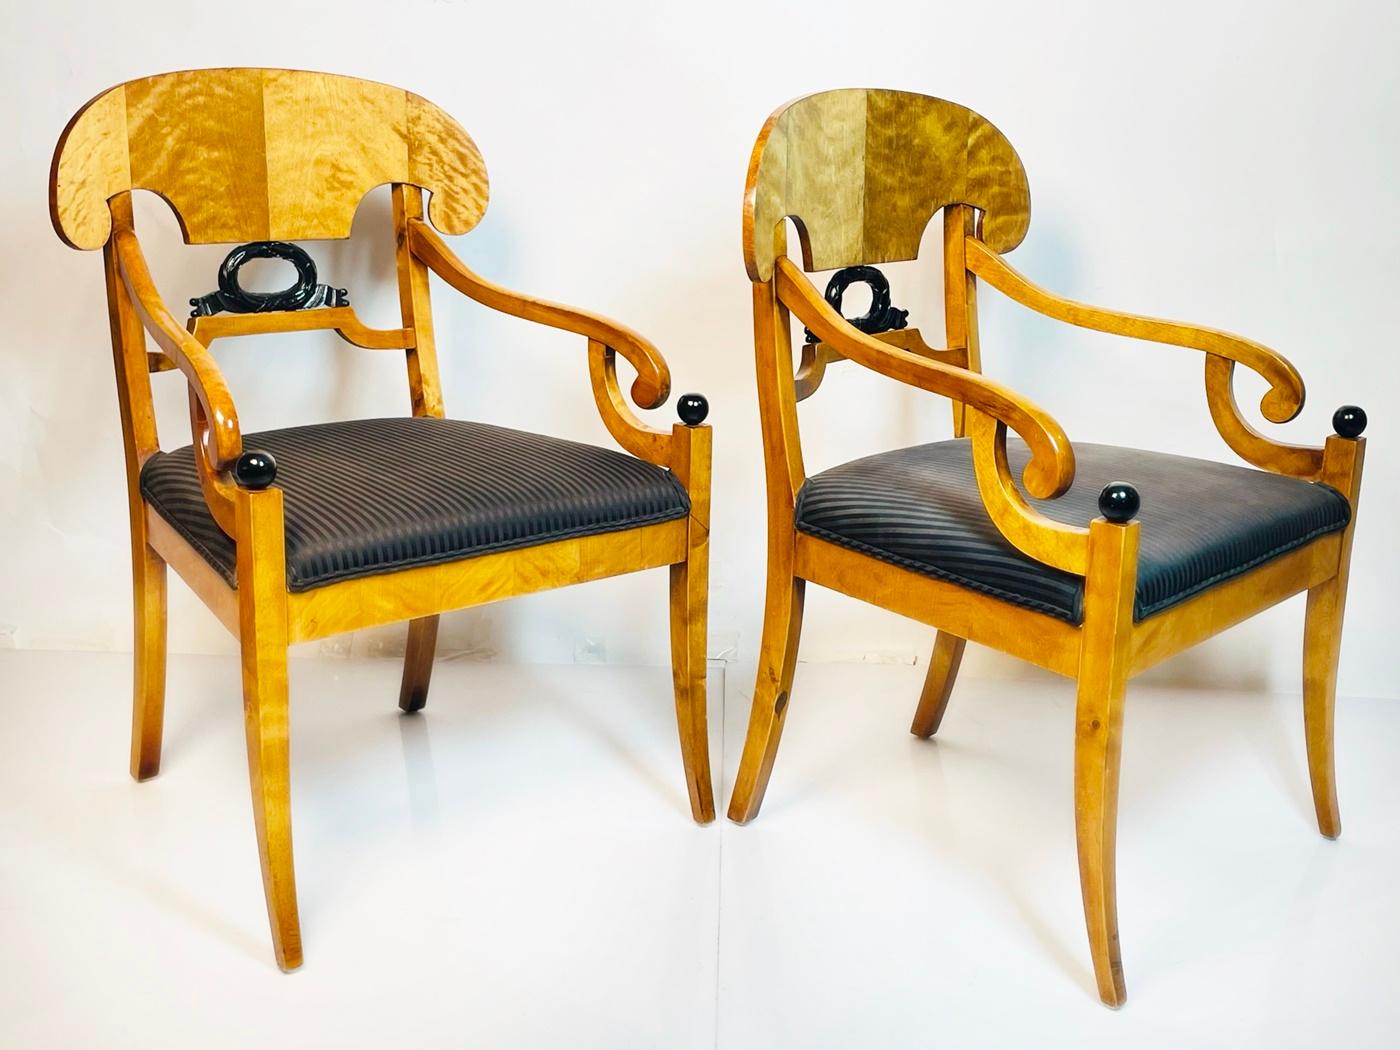 Introducing a timeless piece of furniture that effortlessly blends elegance and functionality - the Pair of Biedermeier Arm Chairs in Flame Birch Wood, hailing from Sweden in the 1900s. Crafted with exquisite attention to detail, these chairs